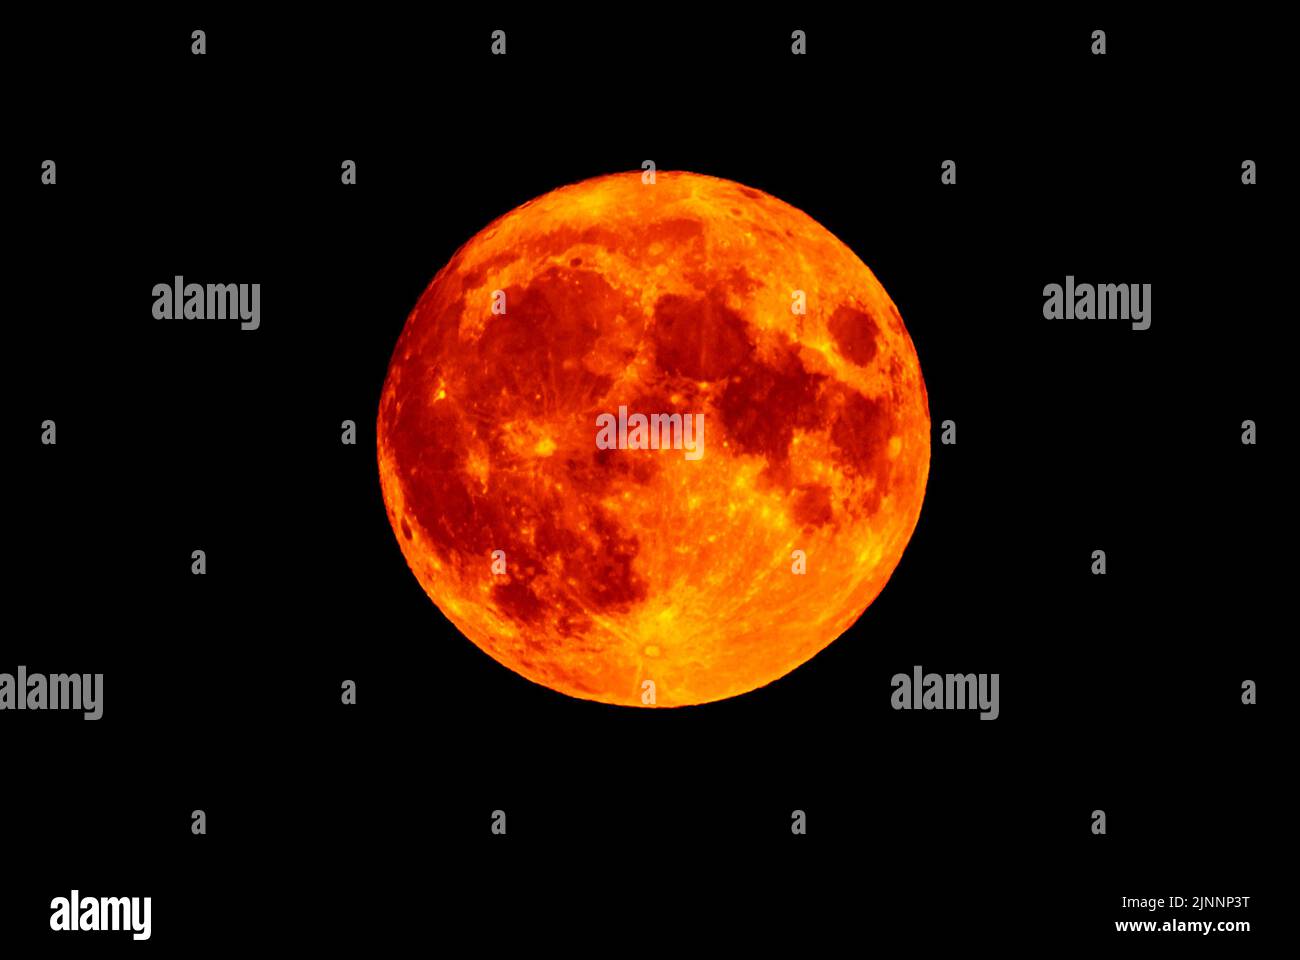 Full moon, a Sturgeon Moon and supermoon (Super Moon), glowing deep red and orange just above the horizon on 11th August 2022 from UK with black sky. Stock Photo